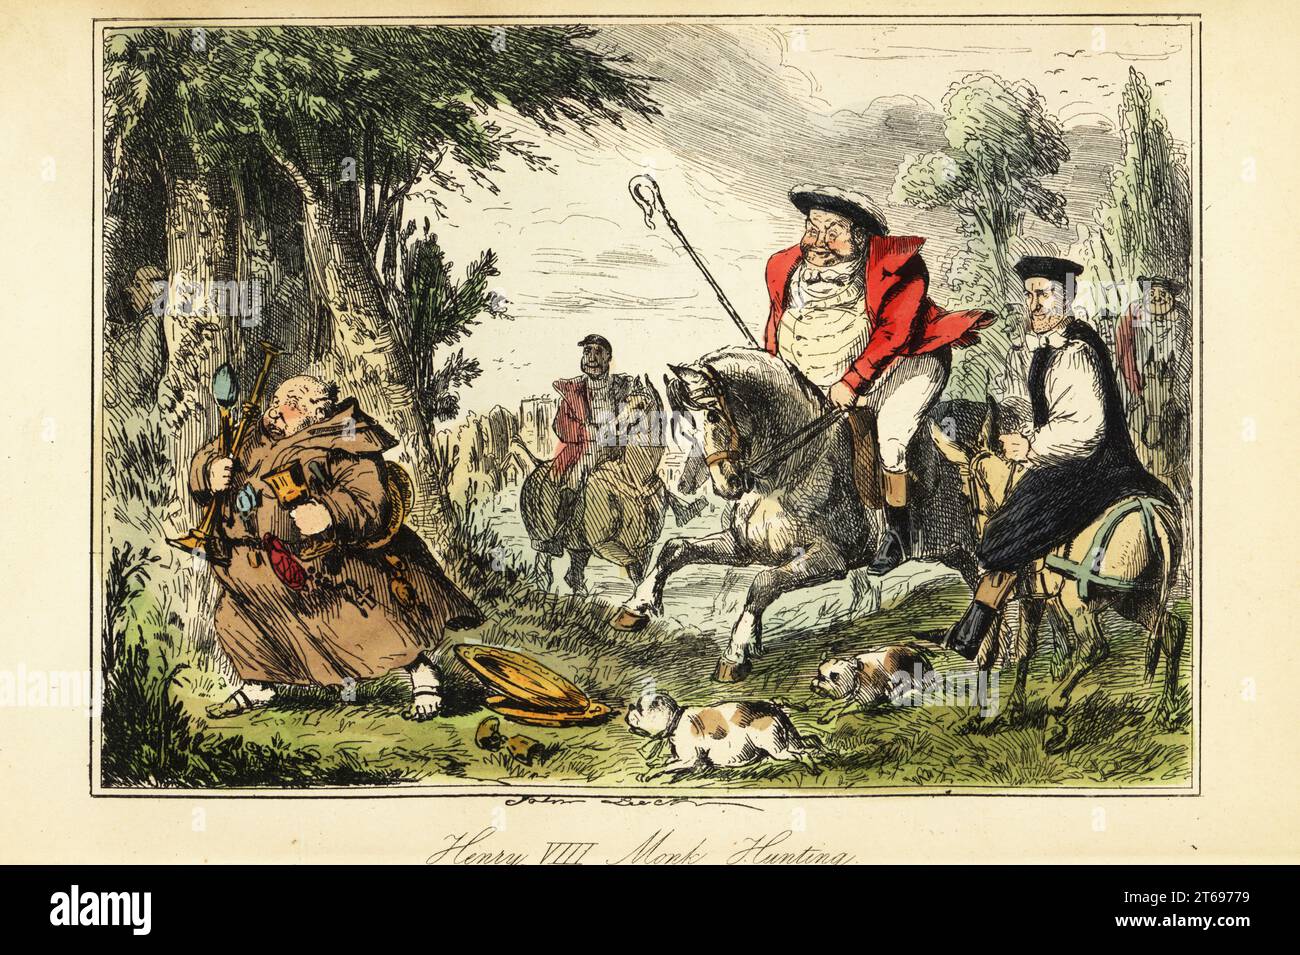 King Henry VIII in Victorian hunting outfit with a shepherds crook on horseback chasing a Catholic monk fleeing with the church gold. Parody of the Dissolution of the Monasteries, circa 1540. Henry hunted in the Epping Forest. Henry VIII monk-hunting. Handcoloured steel engraving after an illustration by John Leech from Gilbert Abbott ABecketts Comic History of England, Bradbury, Agnew & Co., London, 1880. Stock Photo